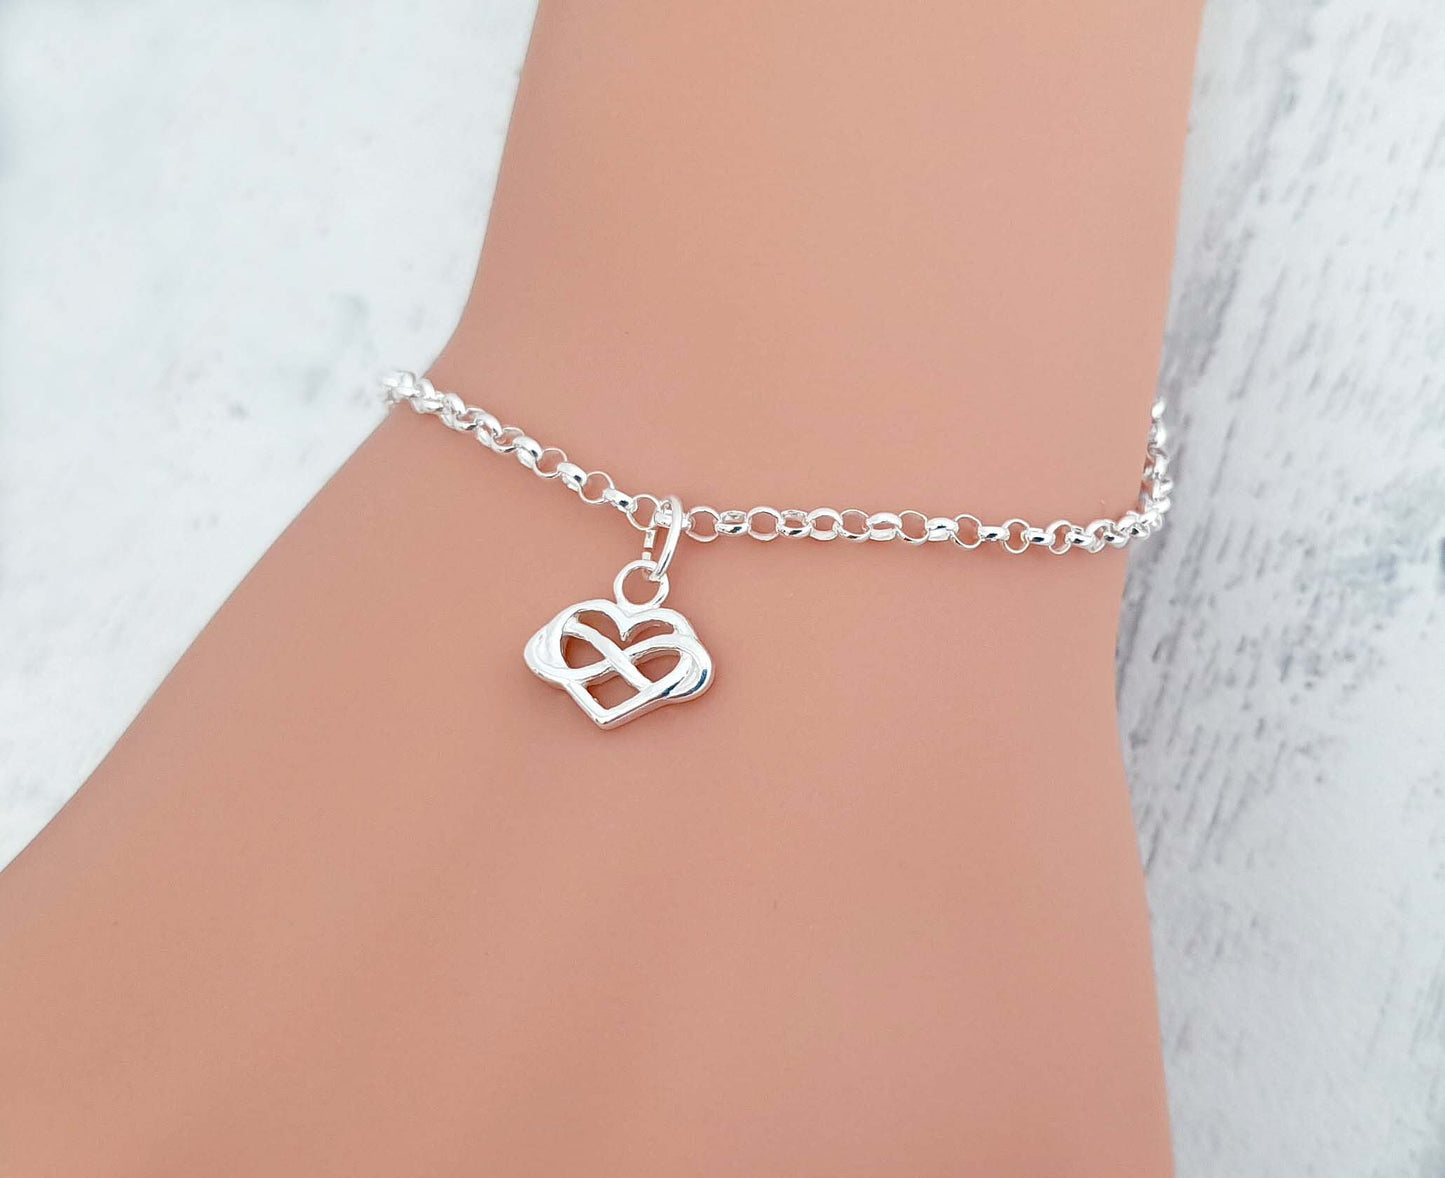 Infinity Heart 925 Sterling Silver Link Bracelet with Optional Birthstone - Includes a Personalised Gift Message